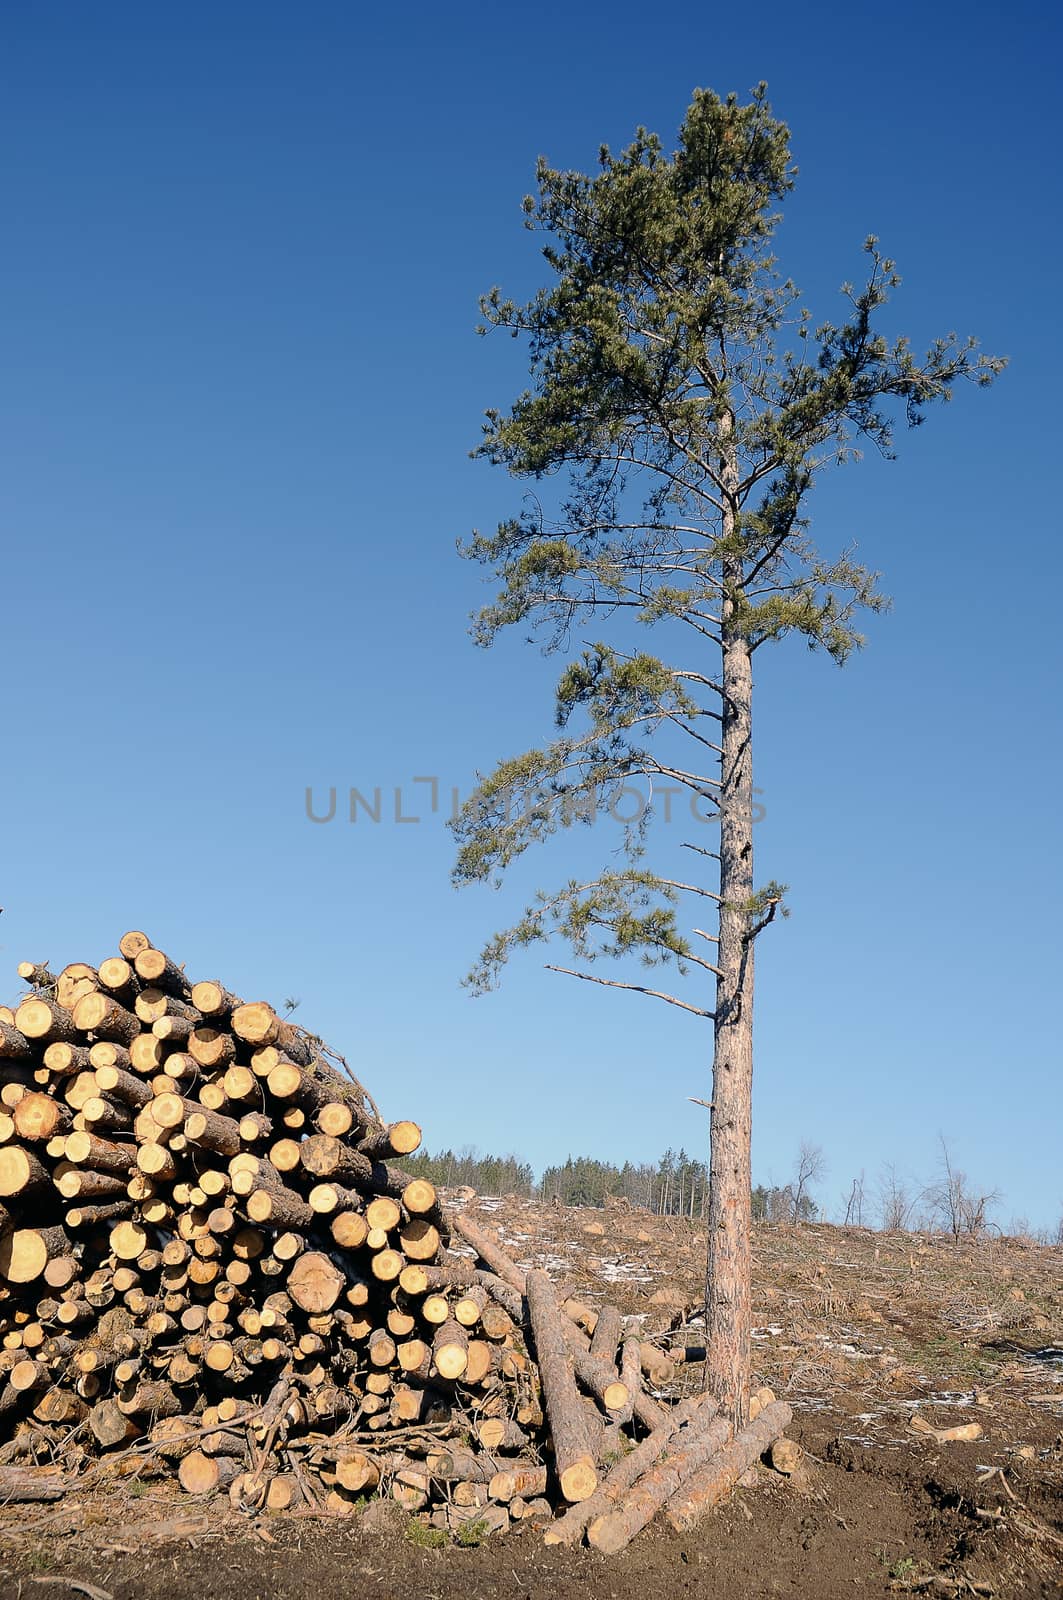 Timber Stack on clearcutting area and a lonely tree